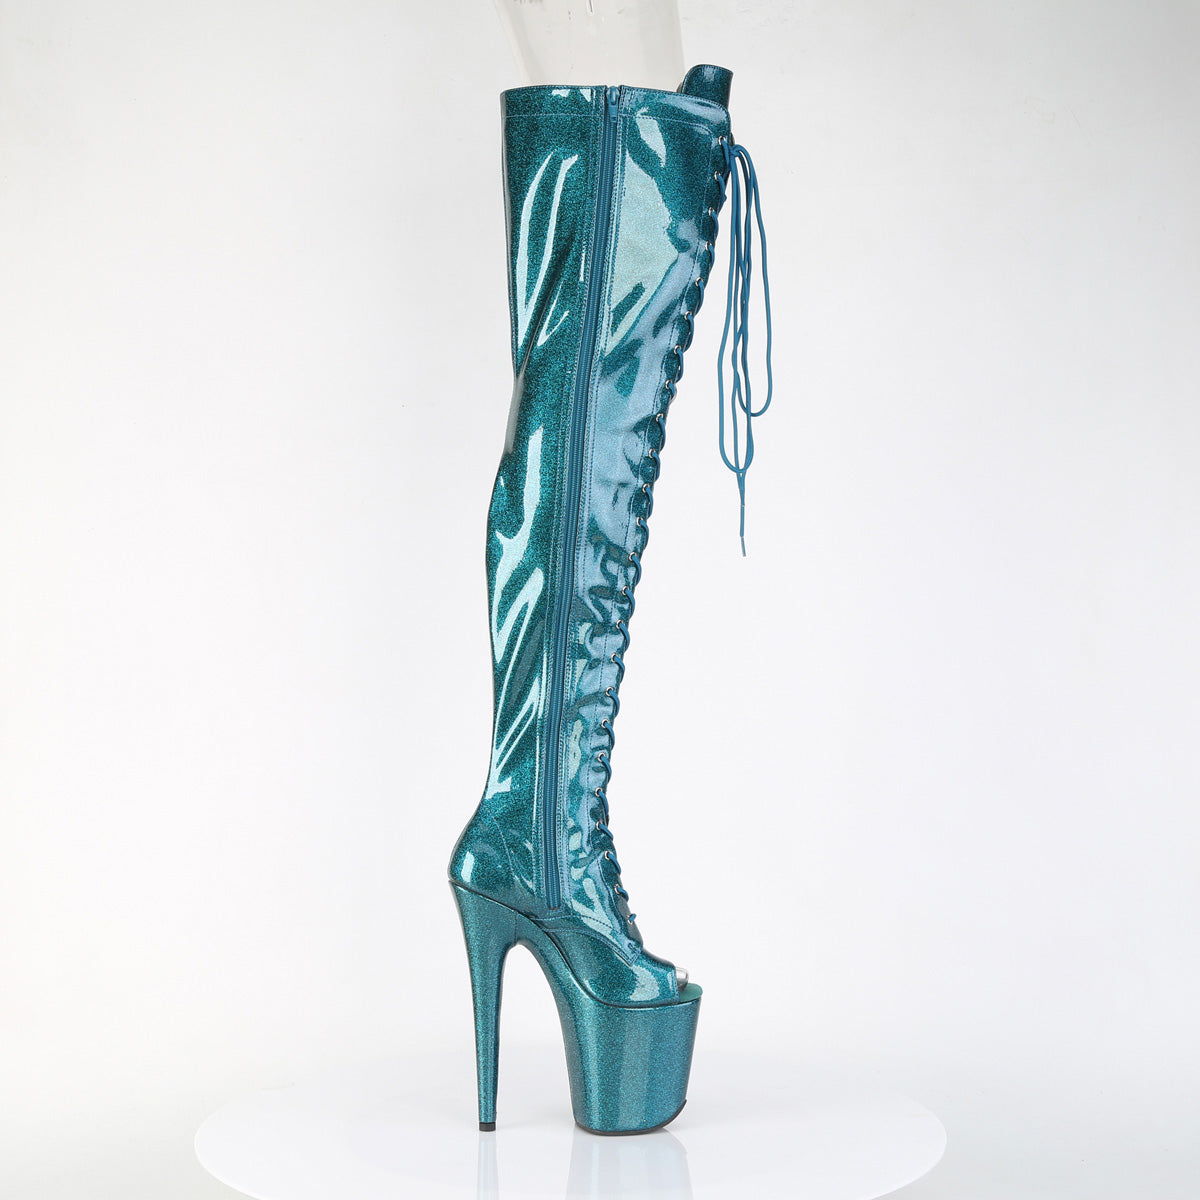 FLAMINGO-3021GP Teal Glitter Patent Thigh High Boots